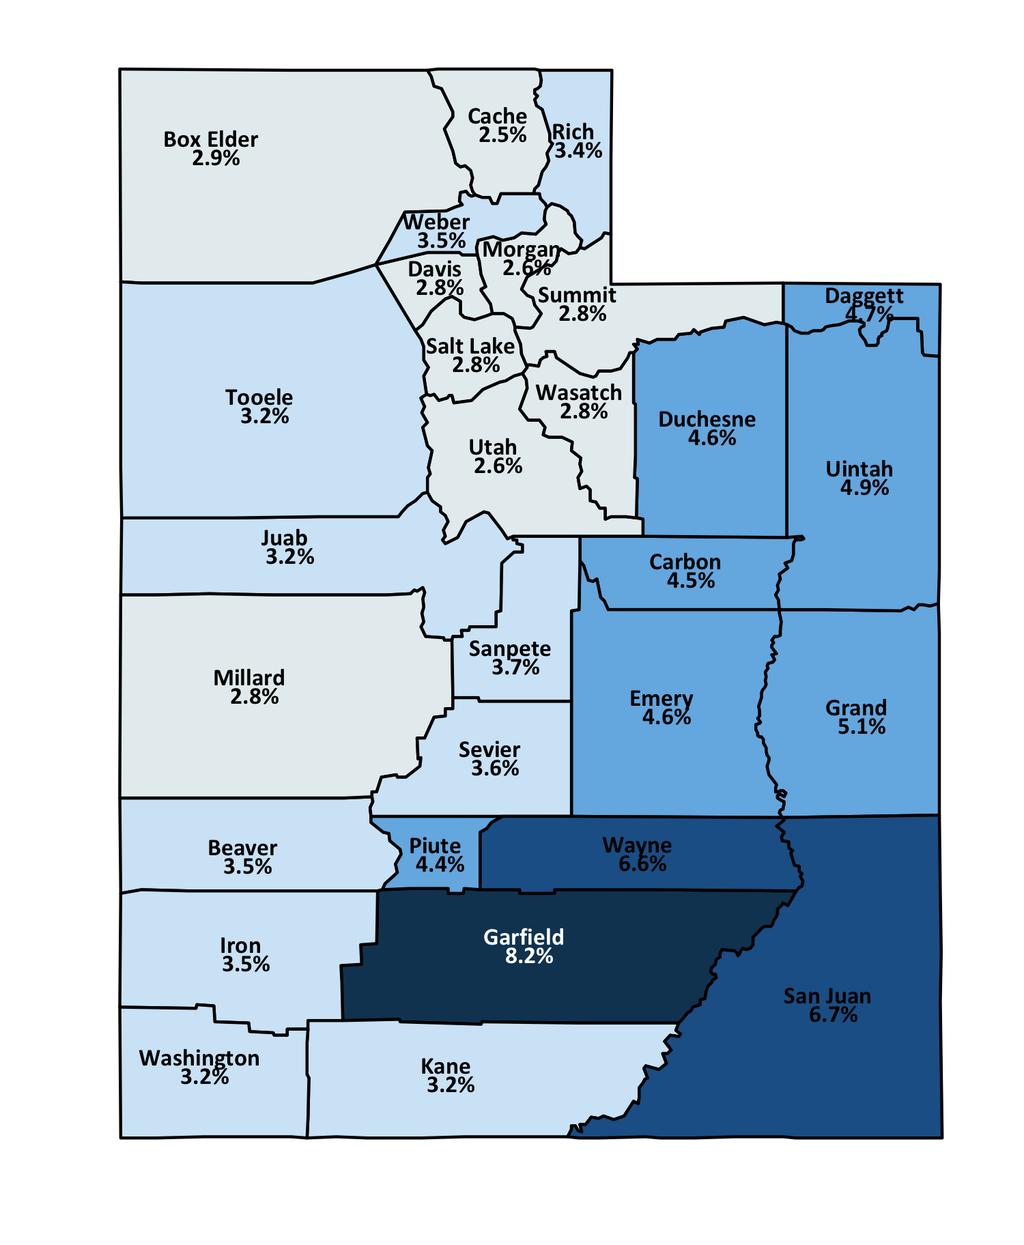 Utah Unemployment Rates By County January 2017 State Rate = 3.1% 7.0% + 6.0% to 6.